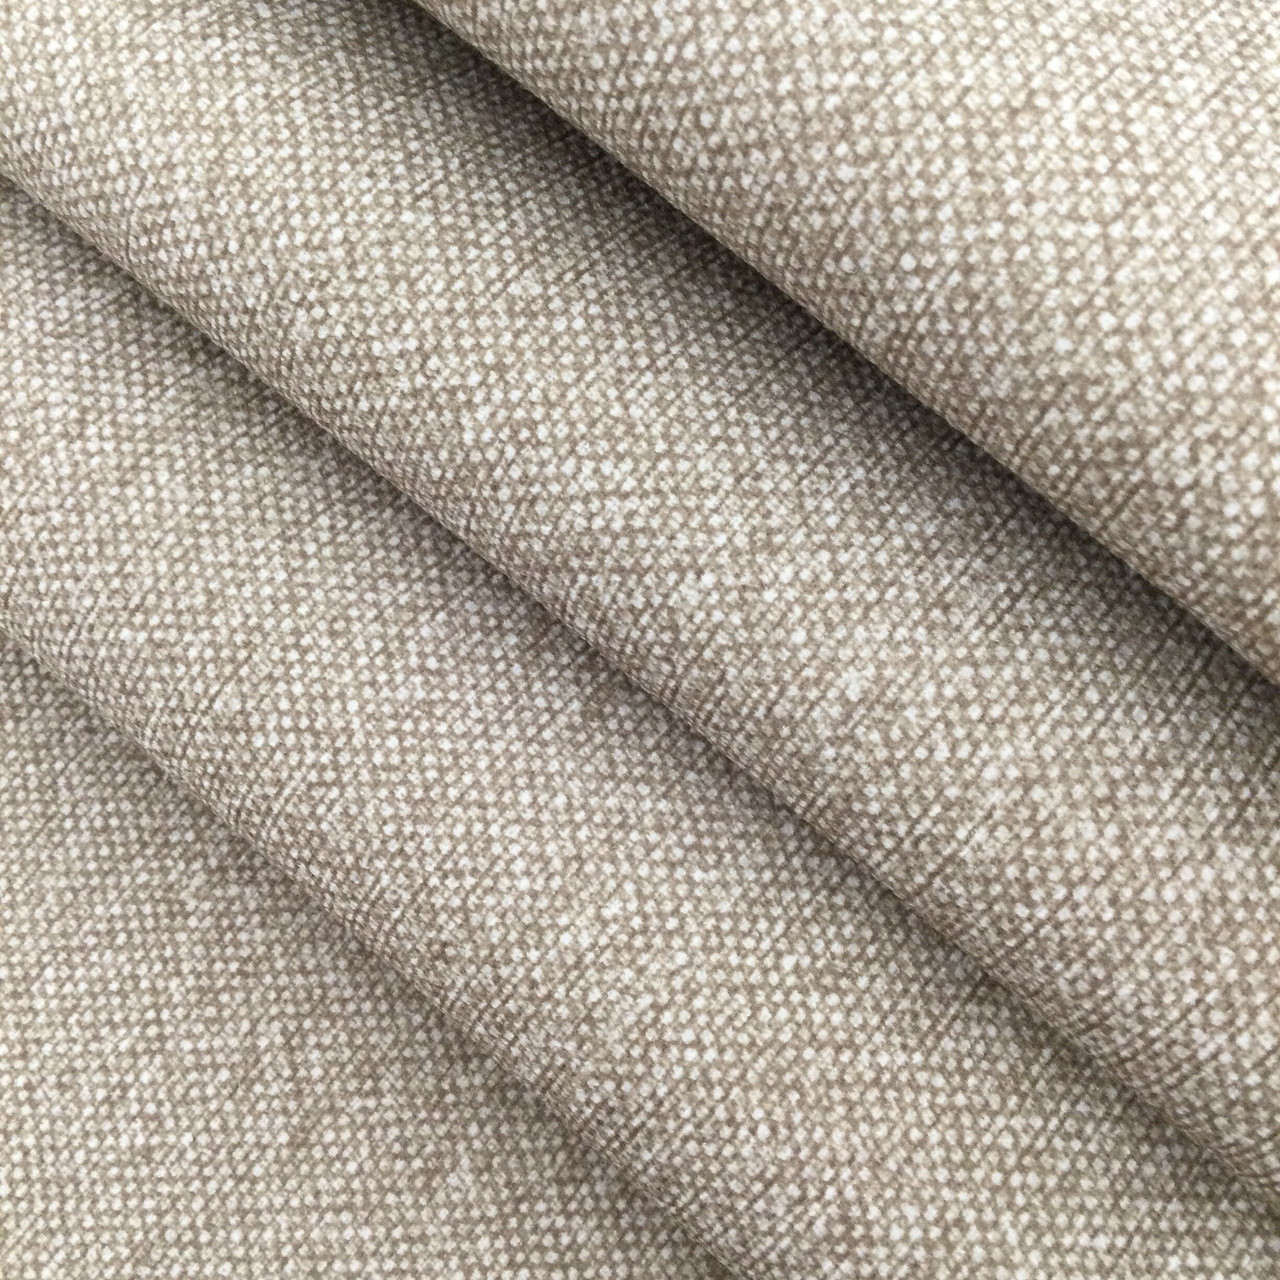 Two Toned Tan Microfiber Fabric, Upholstery, Heavy Weight